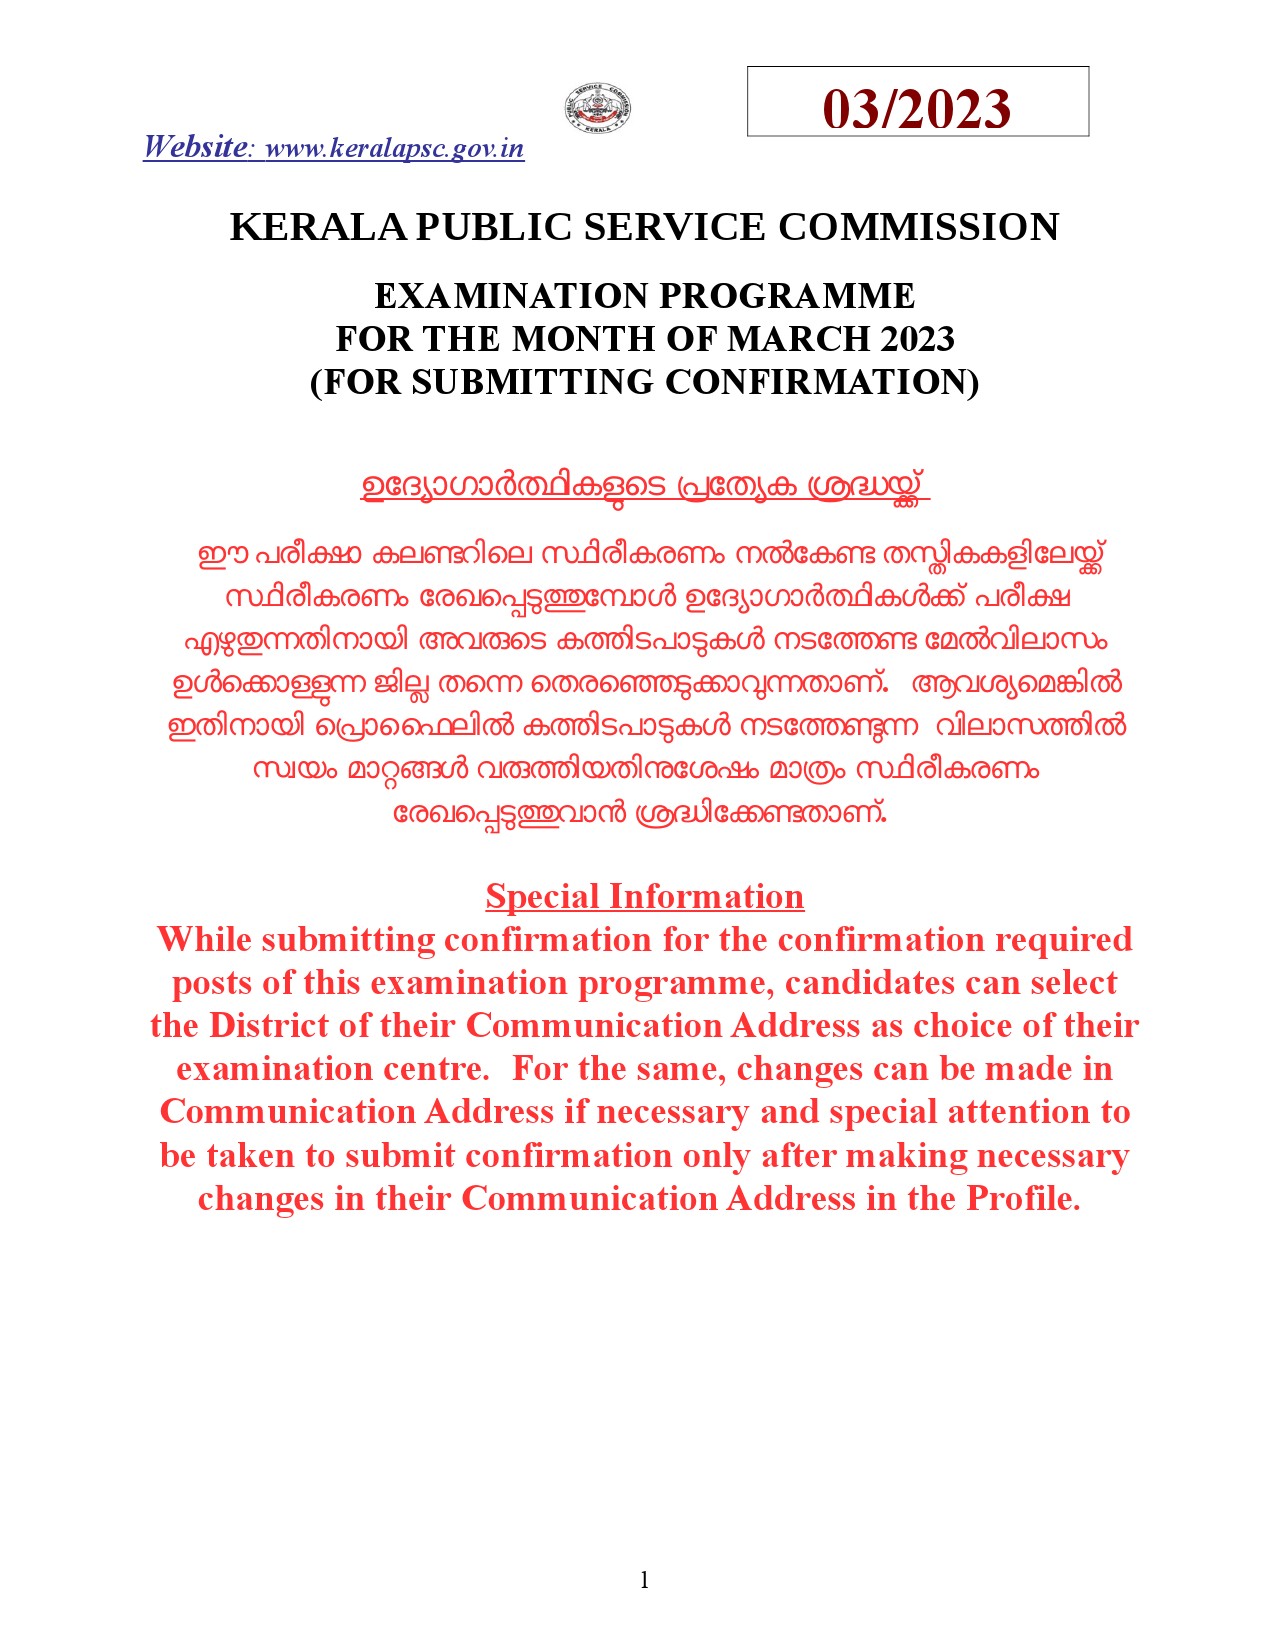 KPSC Examination Programme For The Month Of March 2023 - Notification Image 1